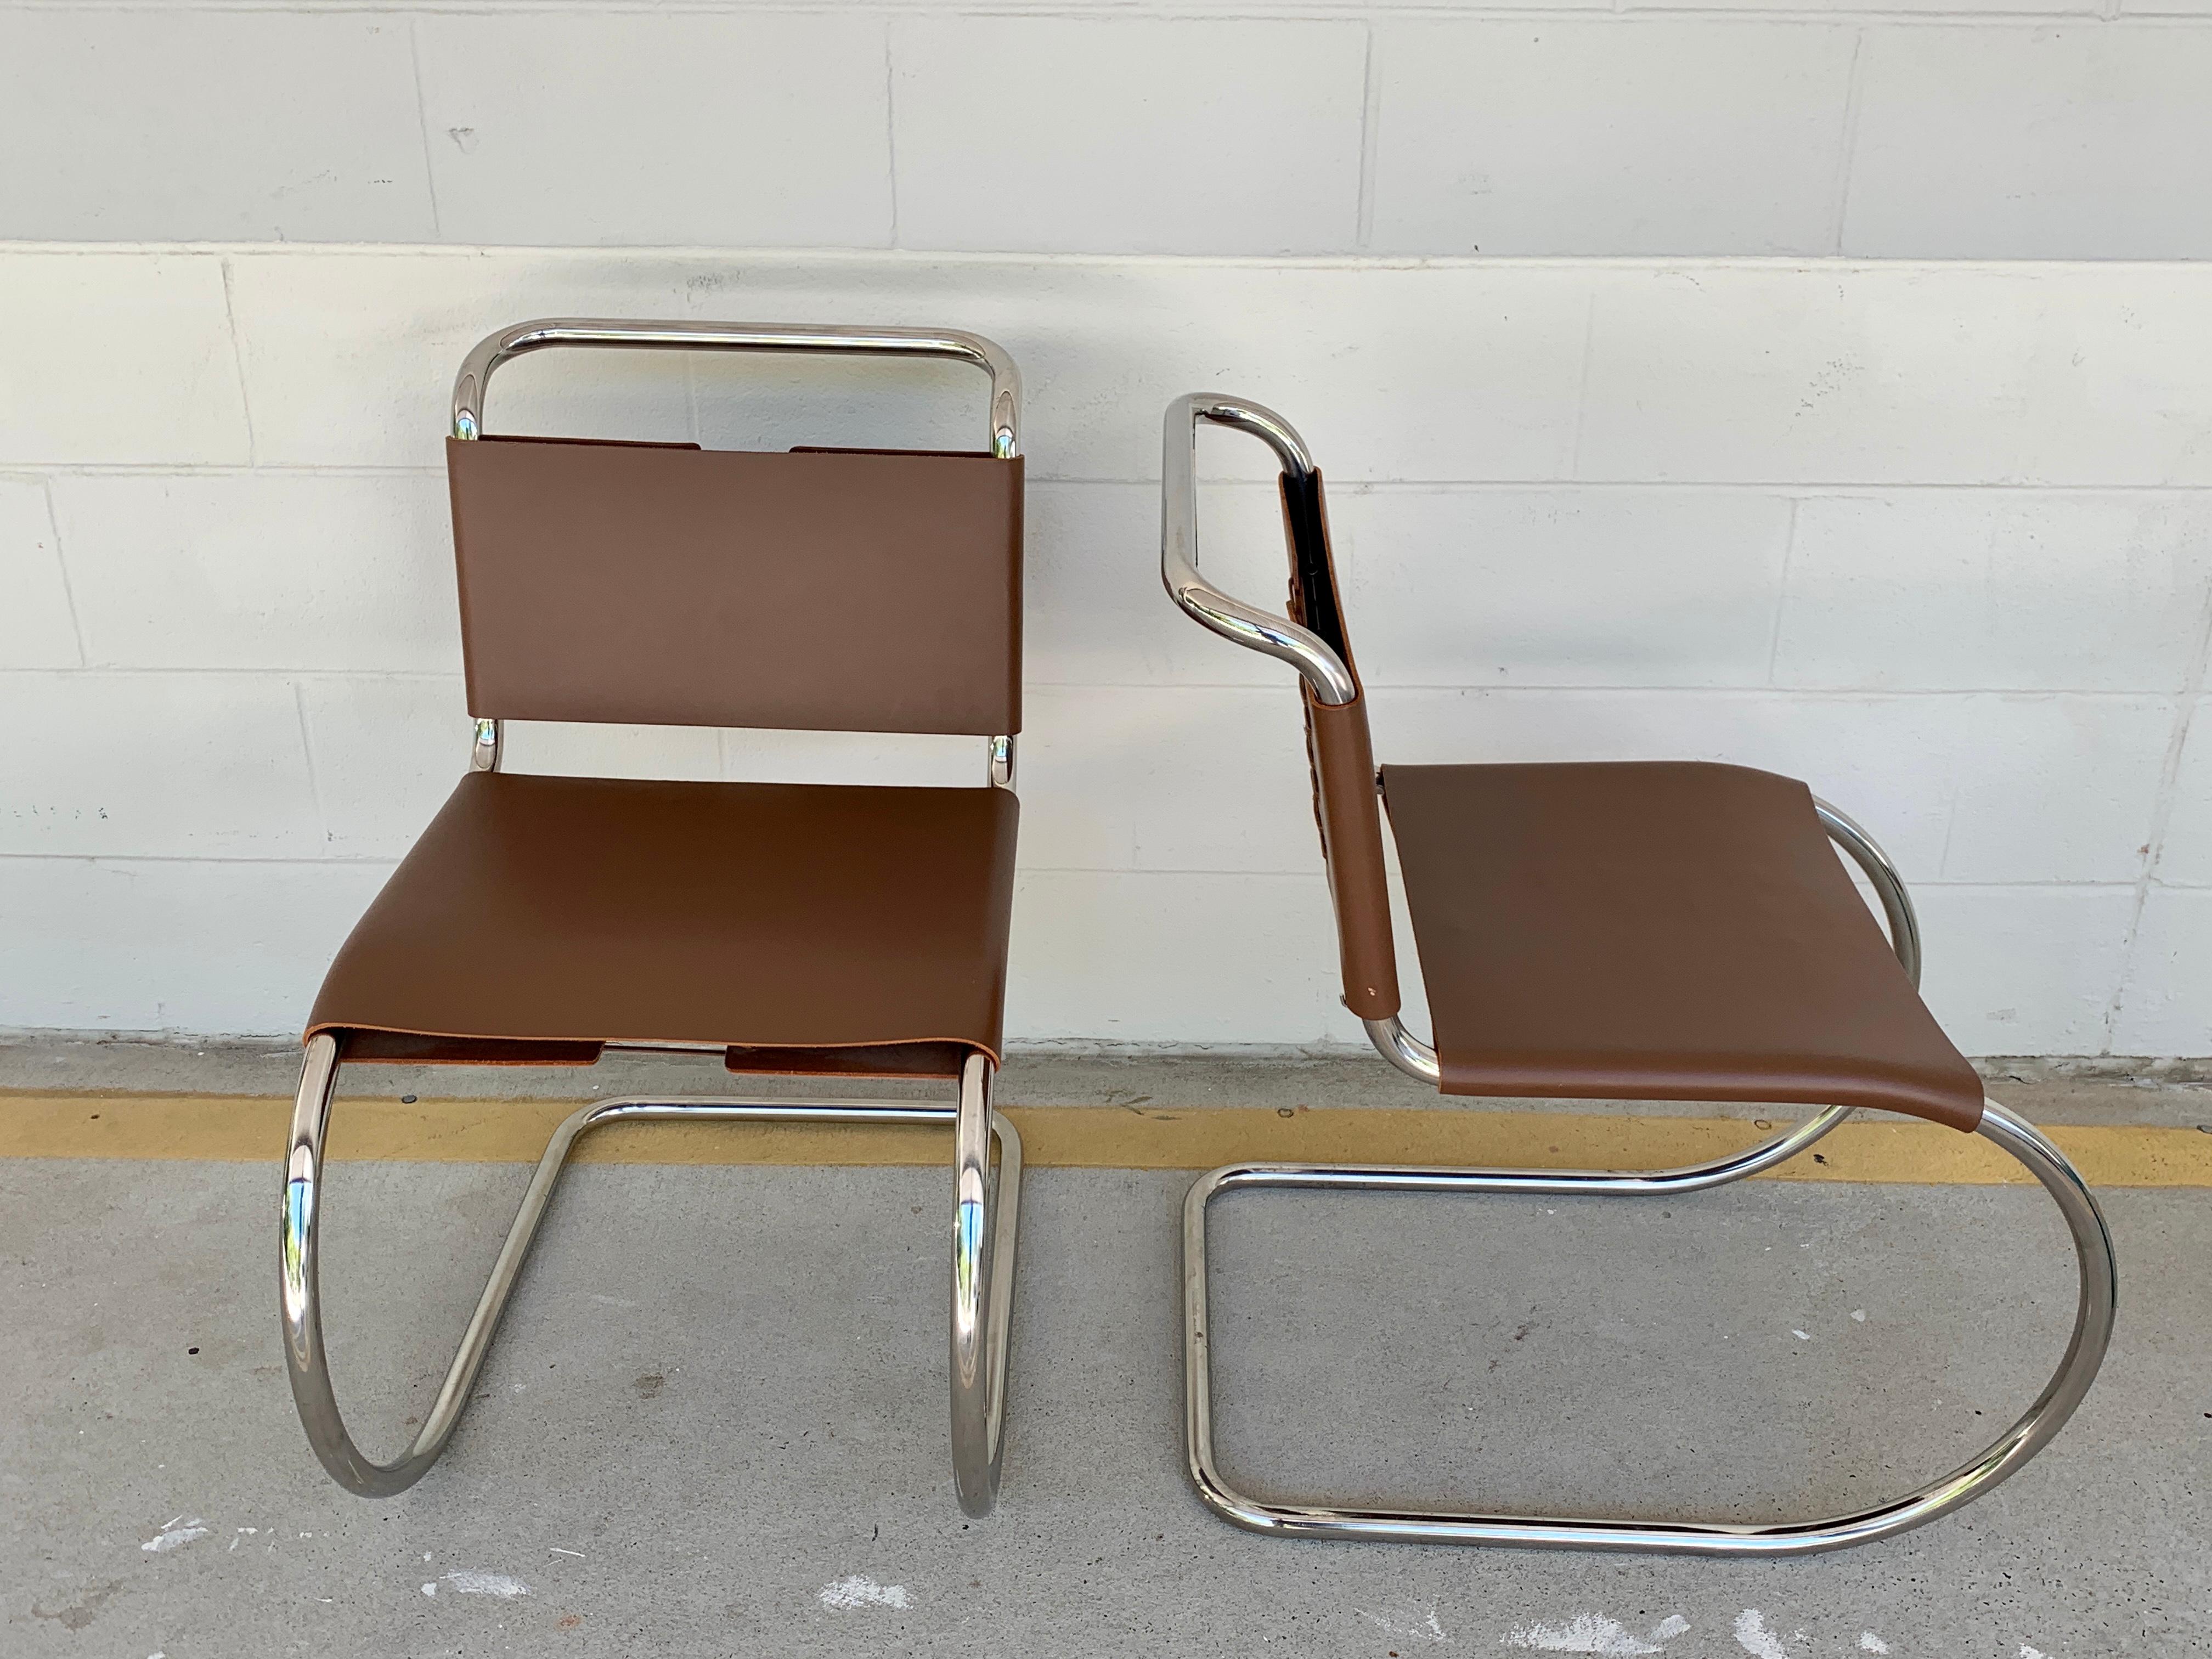 Pair of Knoll MR chair, Stamped Knoll & Mies van der Rohe, light brown cowhide
materials tubular stainless steel and thick light brown leather sling seat with leather laces.
 